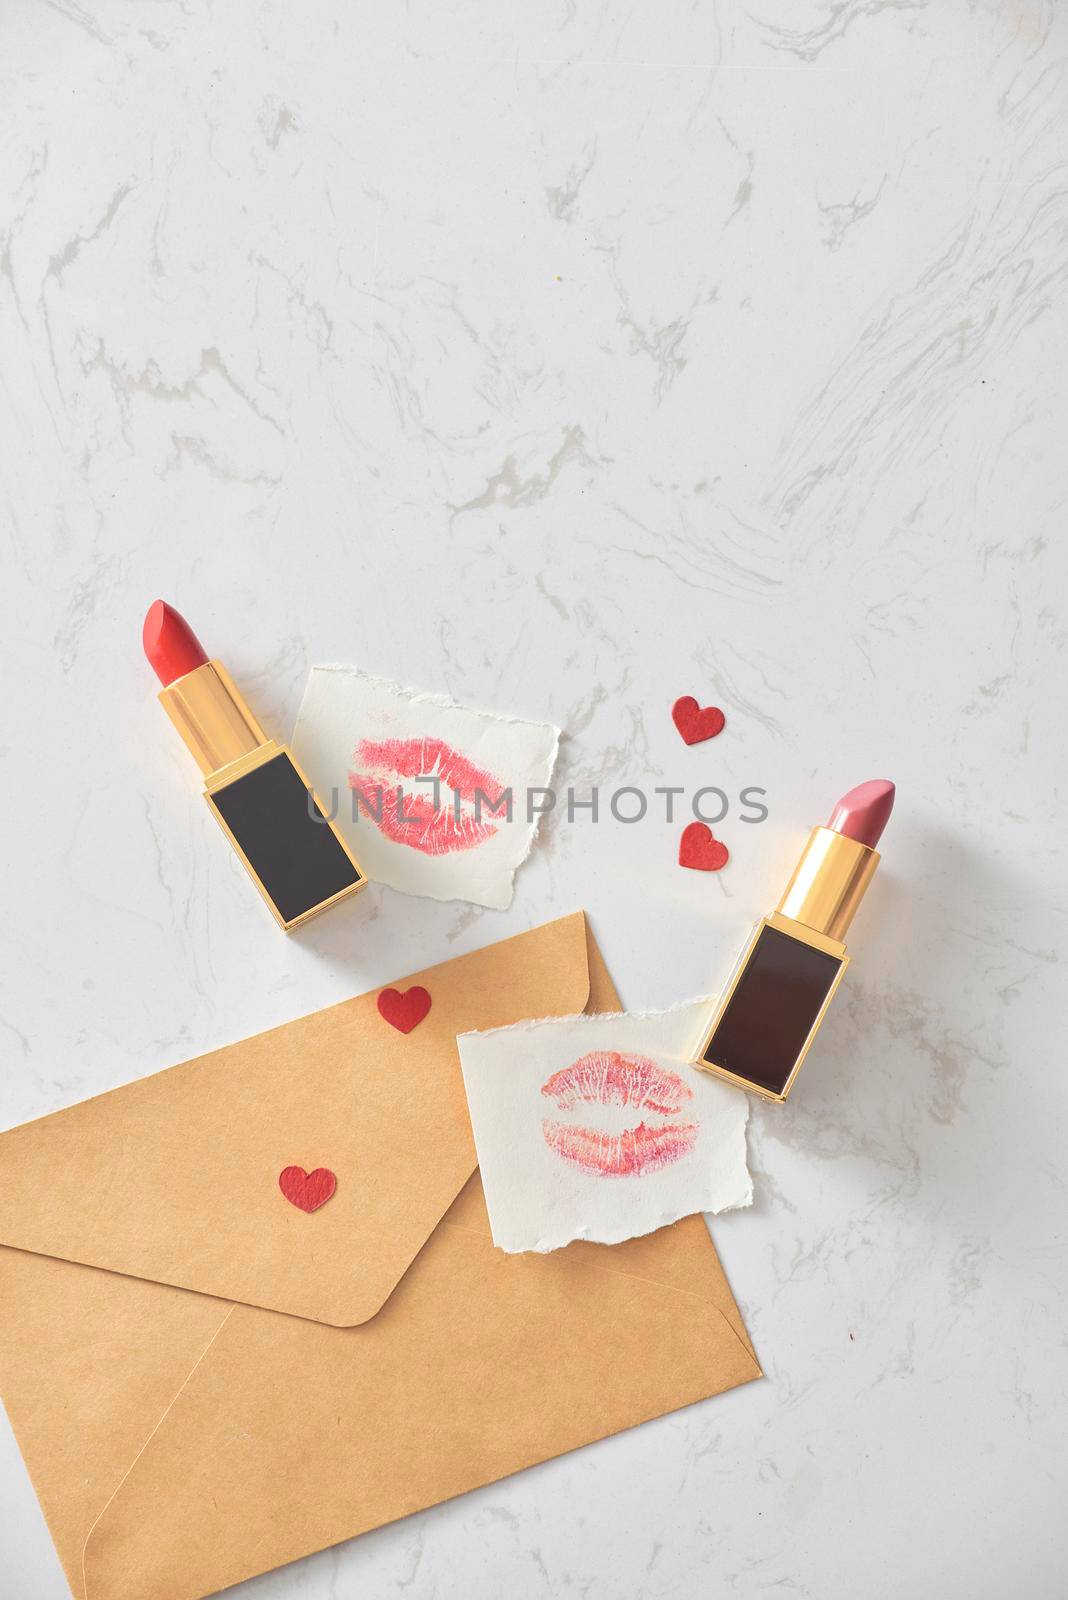 Love valentine together happy affection concept with lipstick and lipstick kiss mark by makidotvn